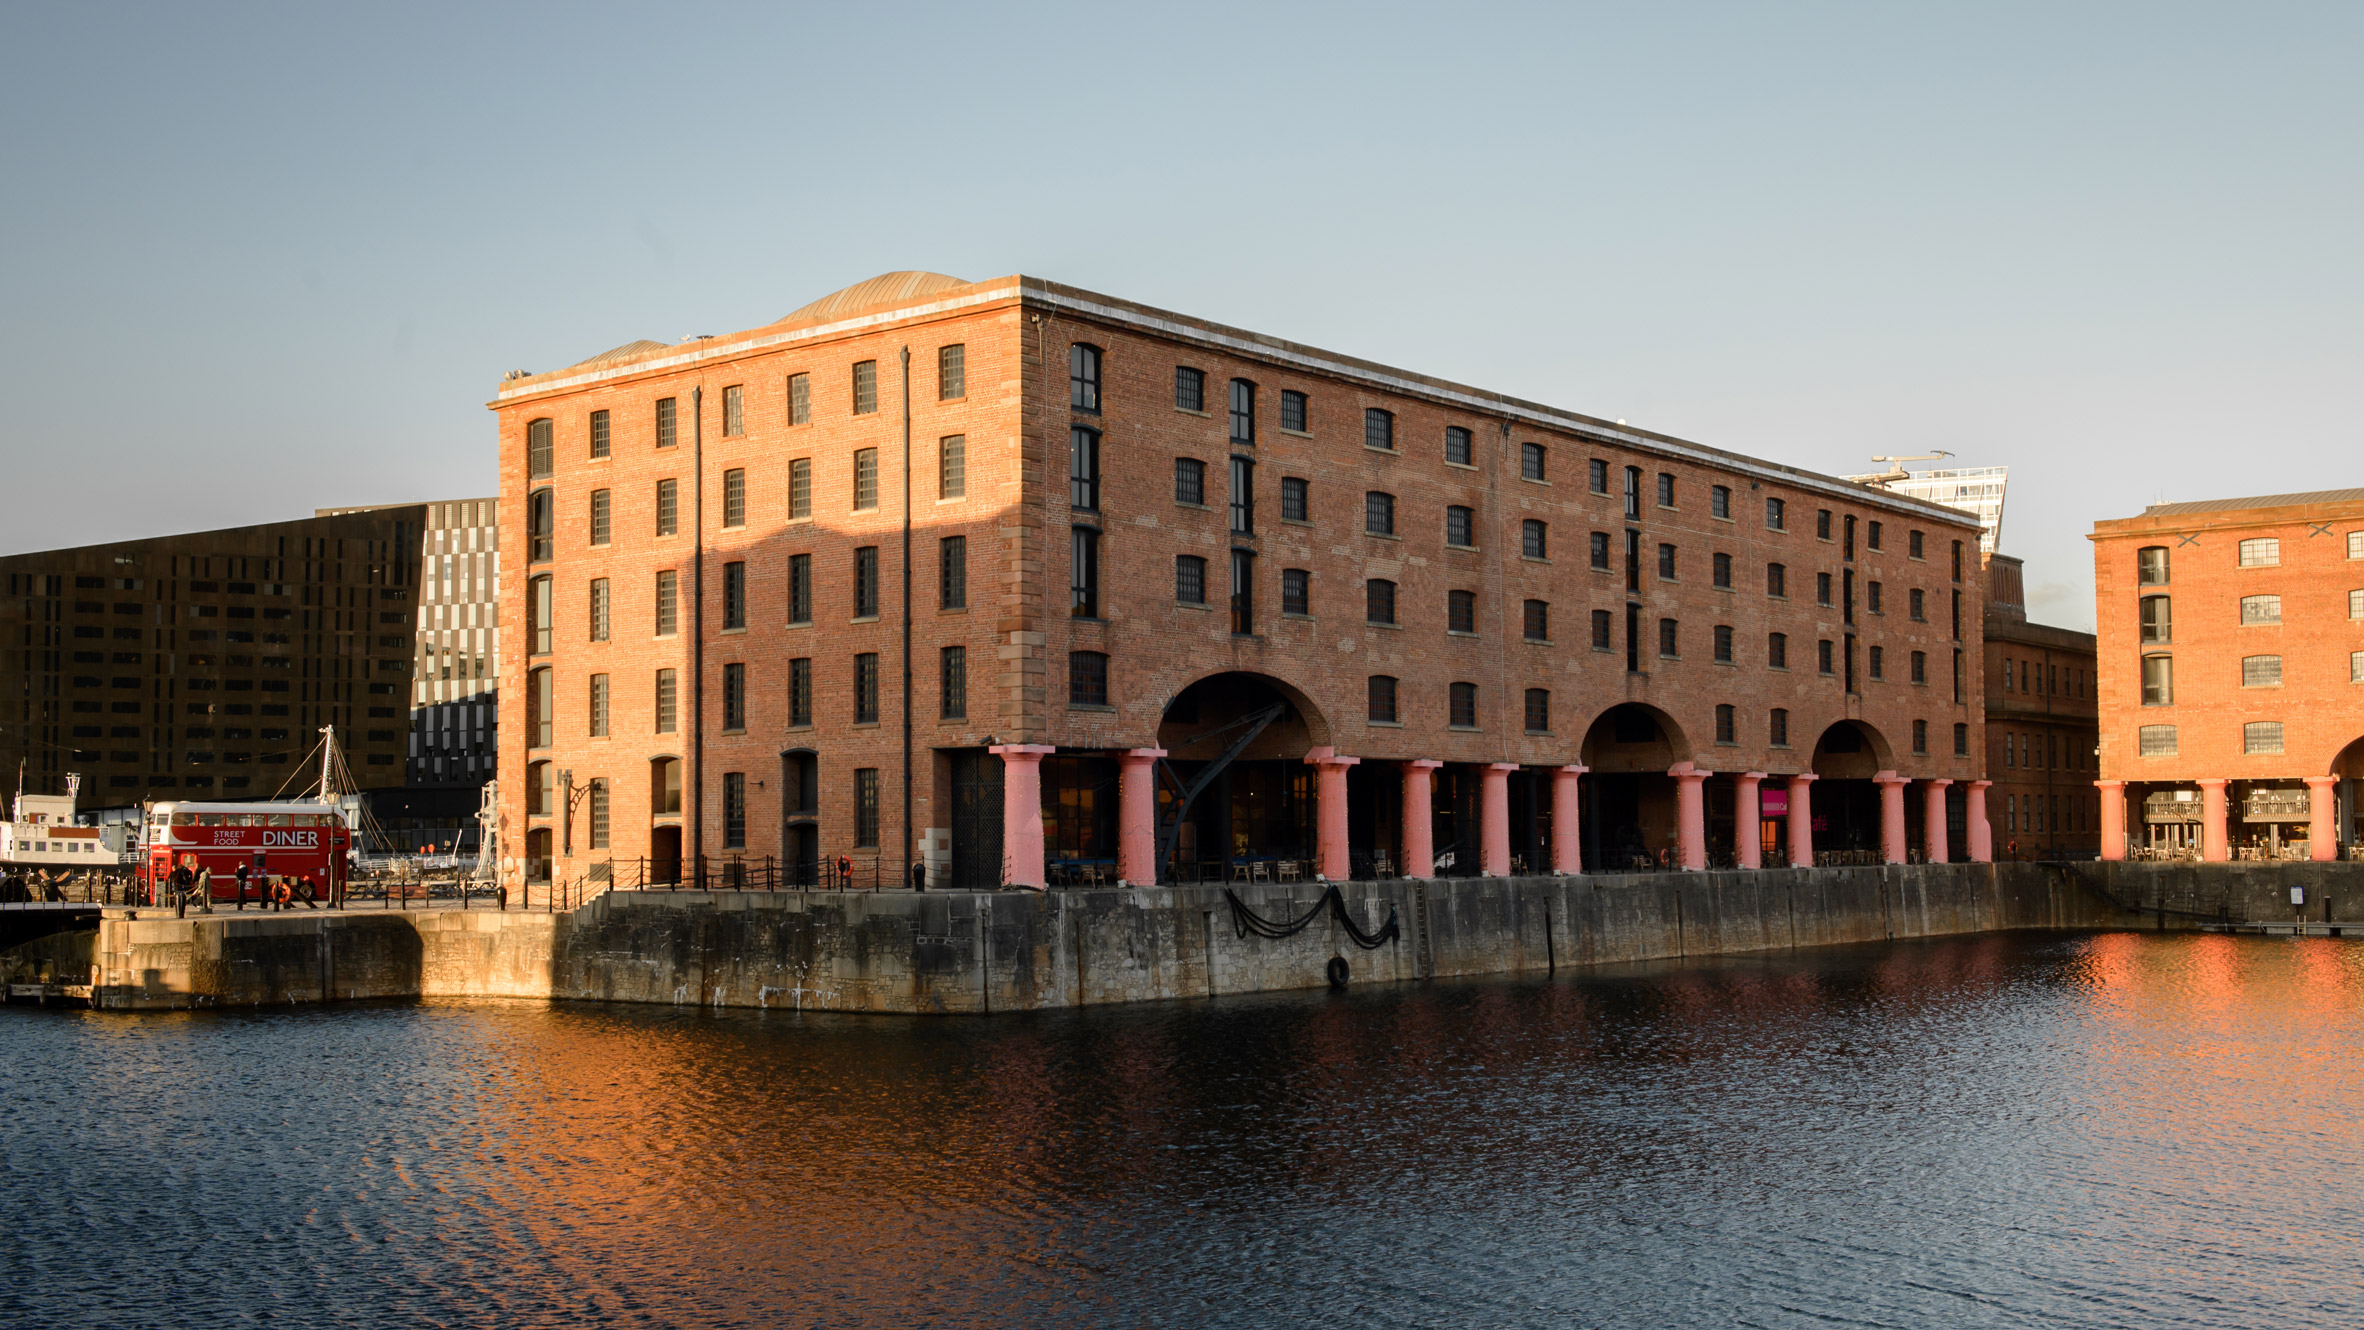 The exterior of the Royal Albert Dock in Liverpool